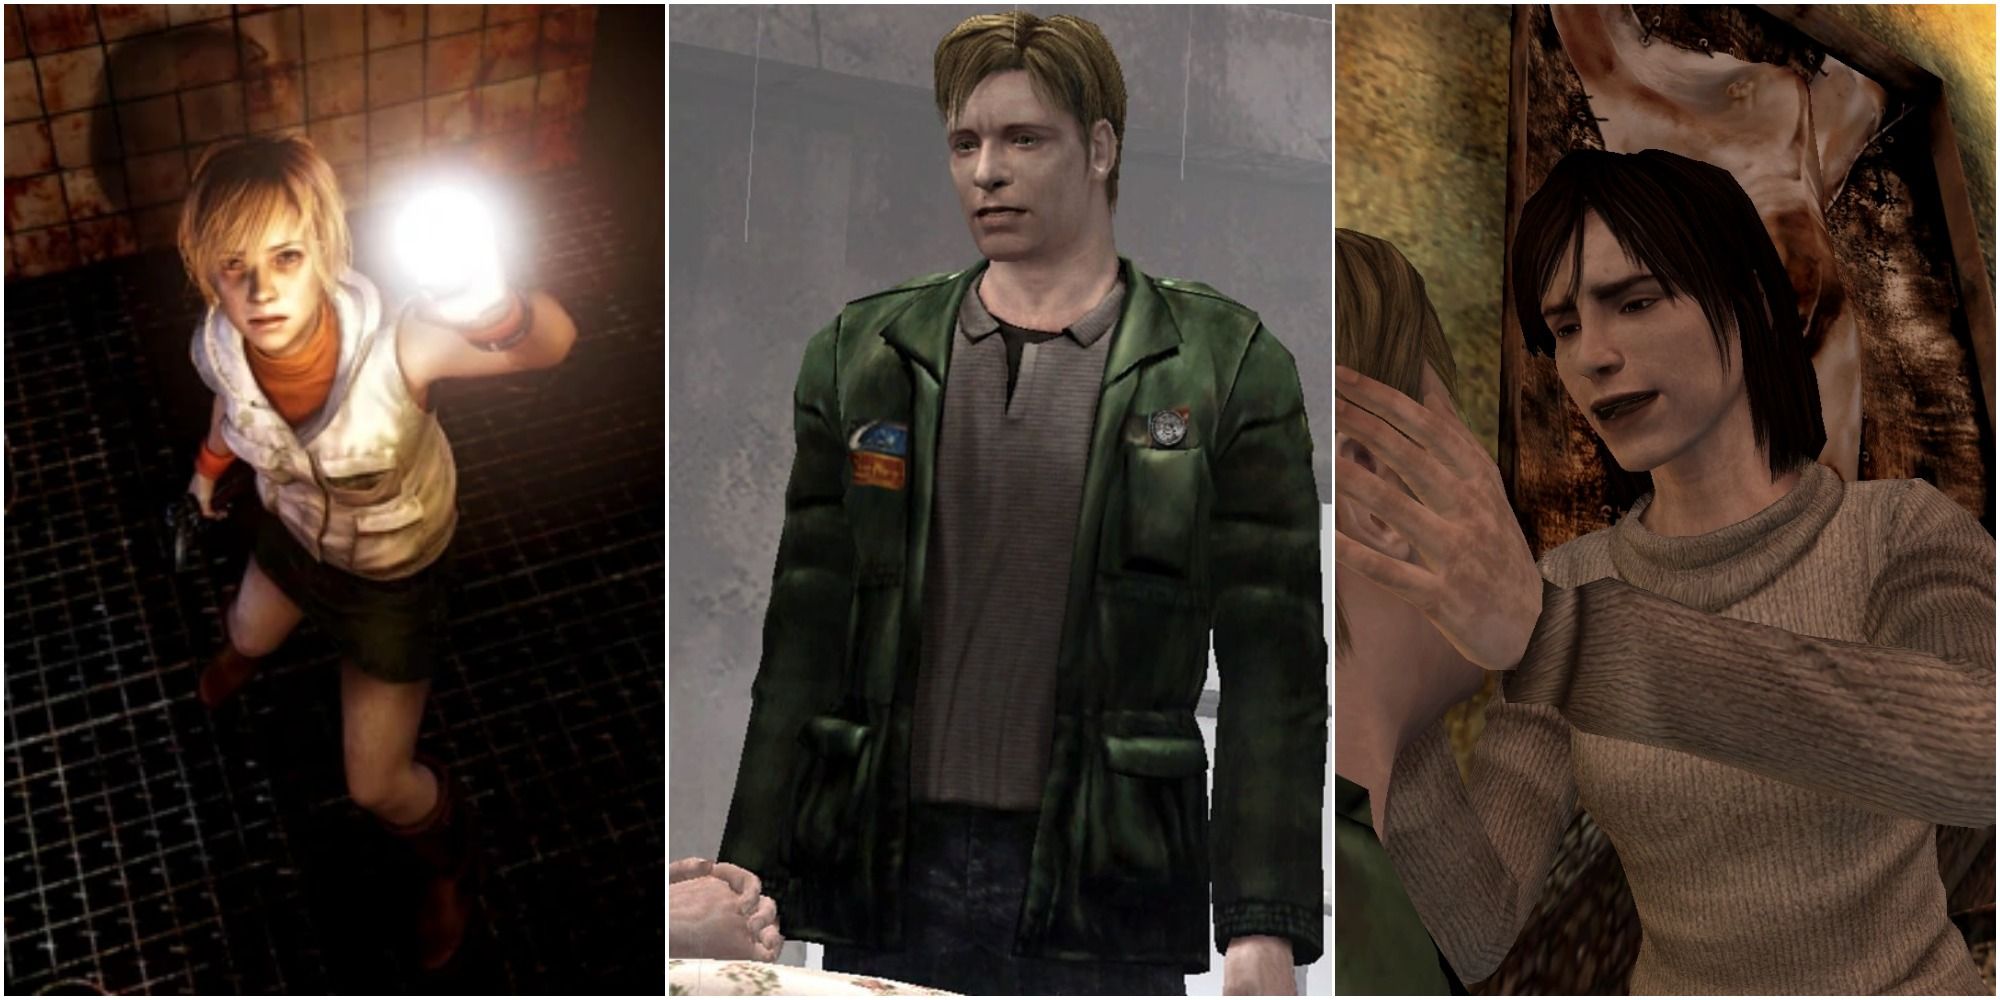 Split image screenshots of Heather Mason from Silent Hill 3, James Sunderland from Silent Hill 2 and Angela Orosco from Silent Hill 2.